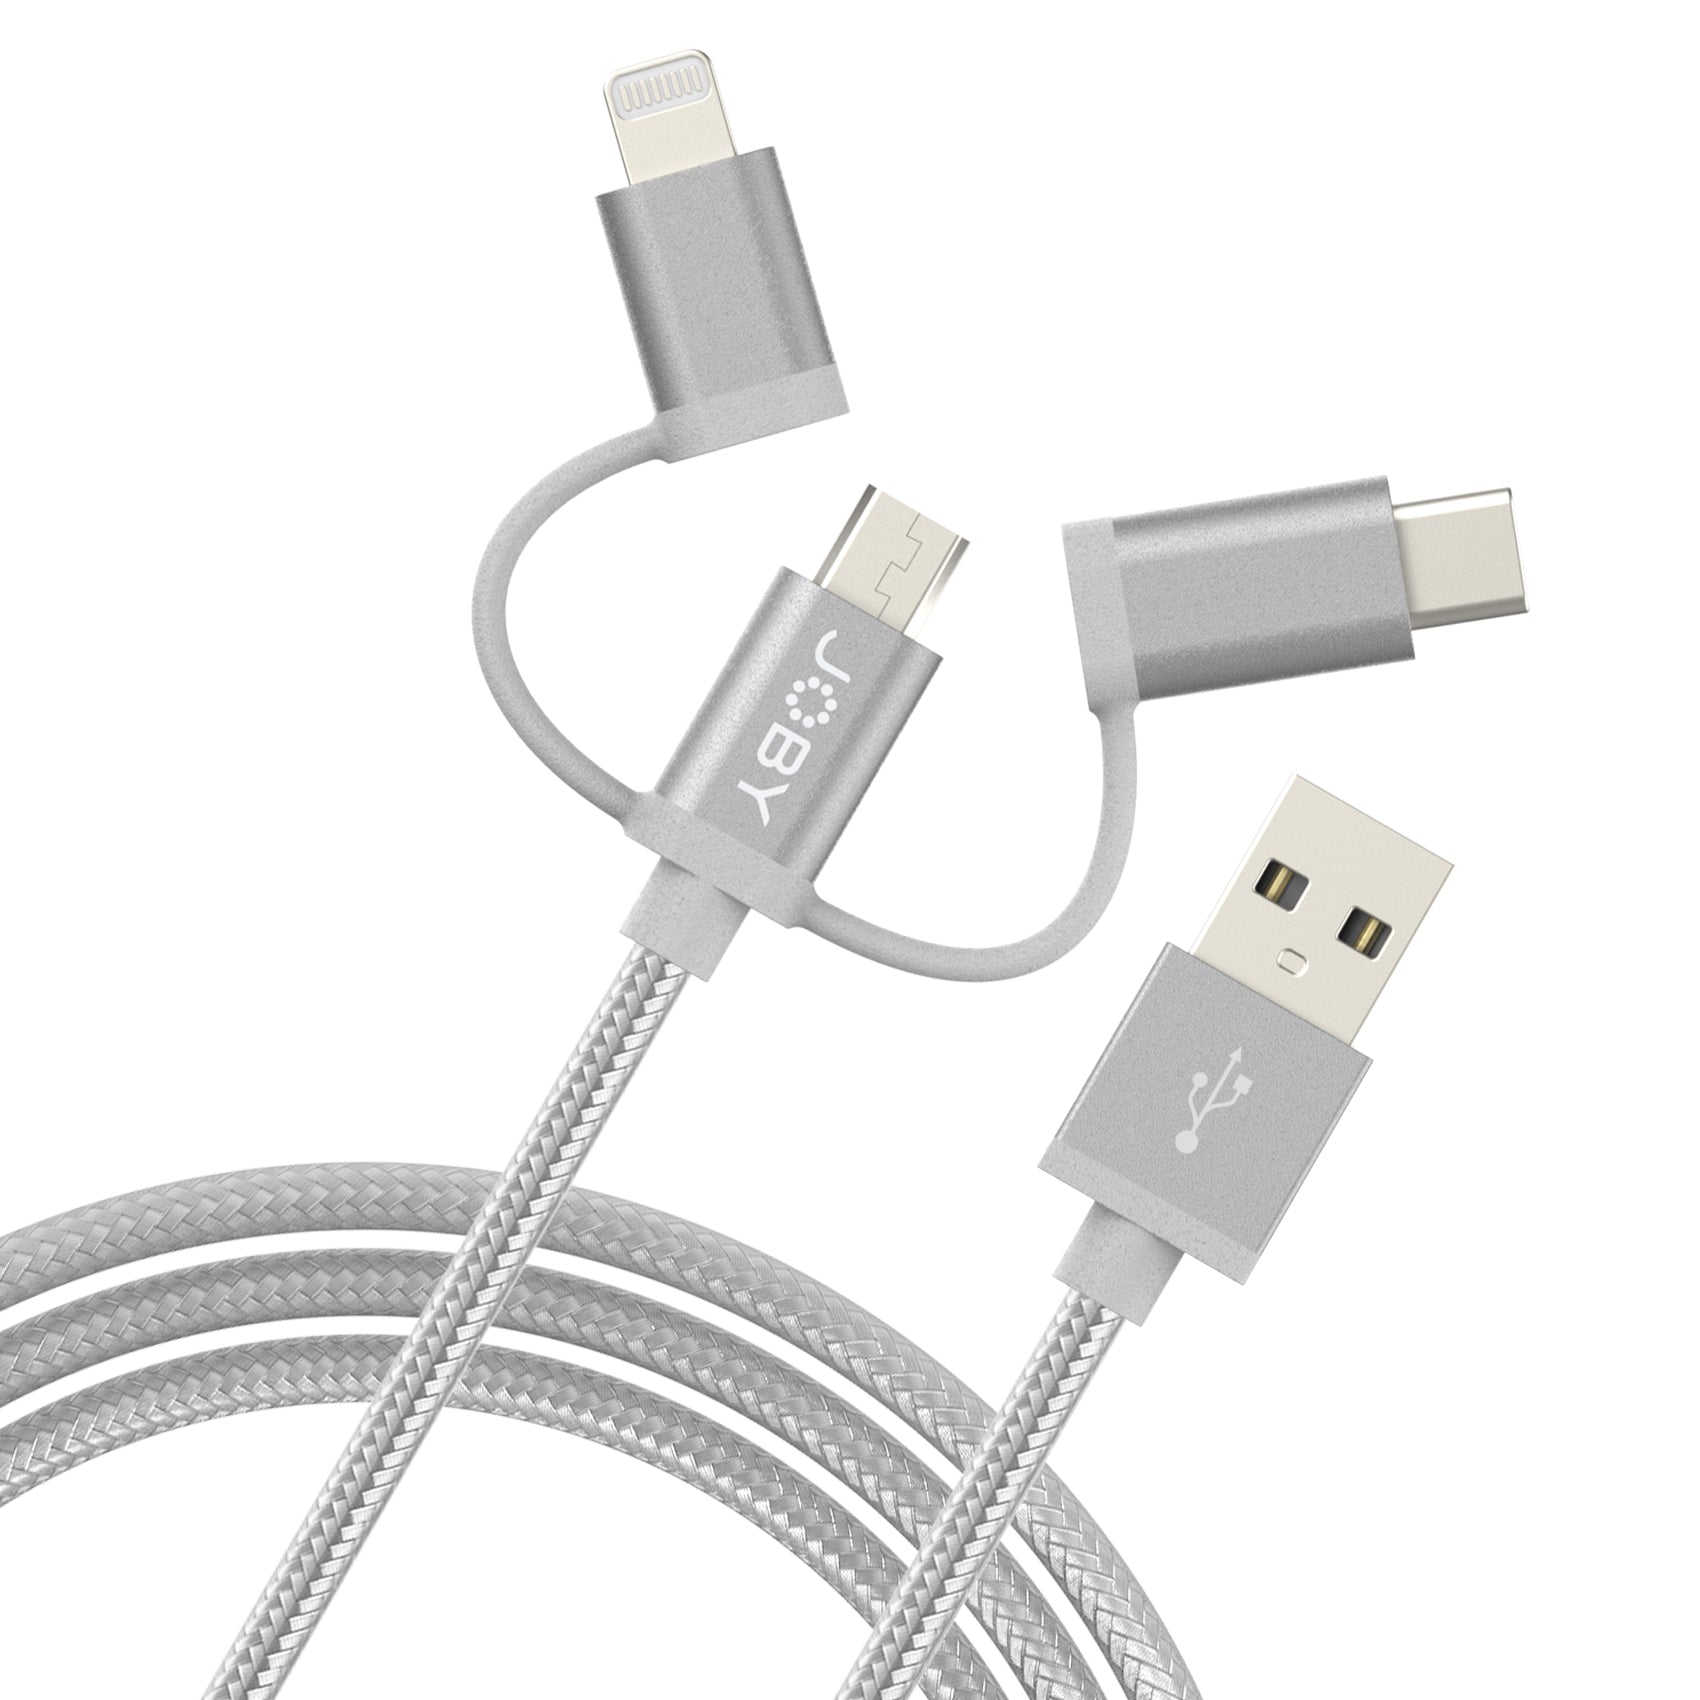 Joby Charge and Sync Cable 3-in-1 - Space Grey - 1.2m/4ft